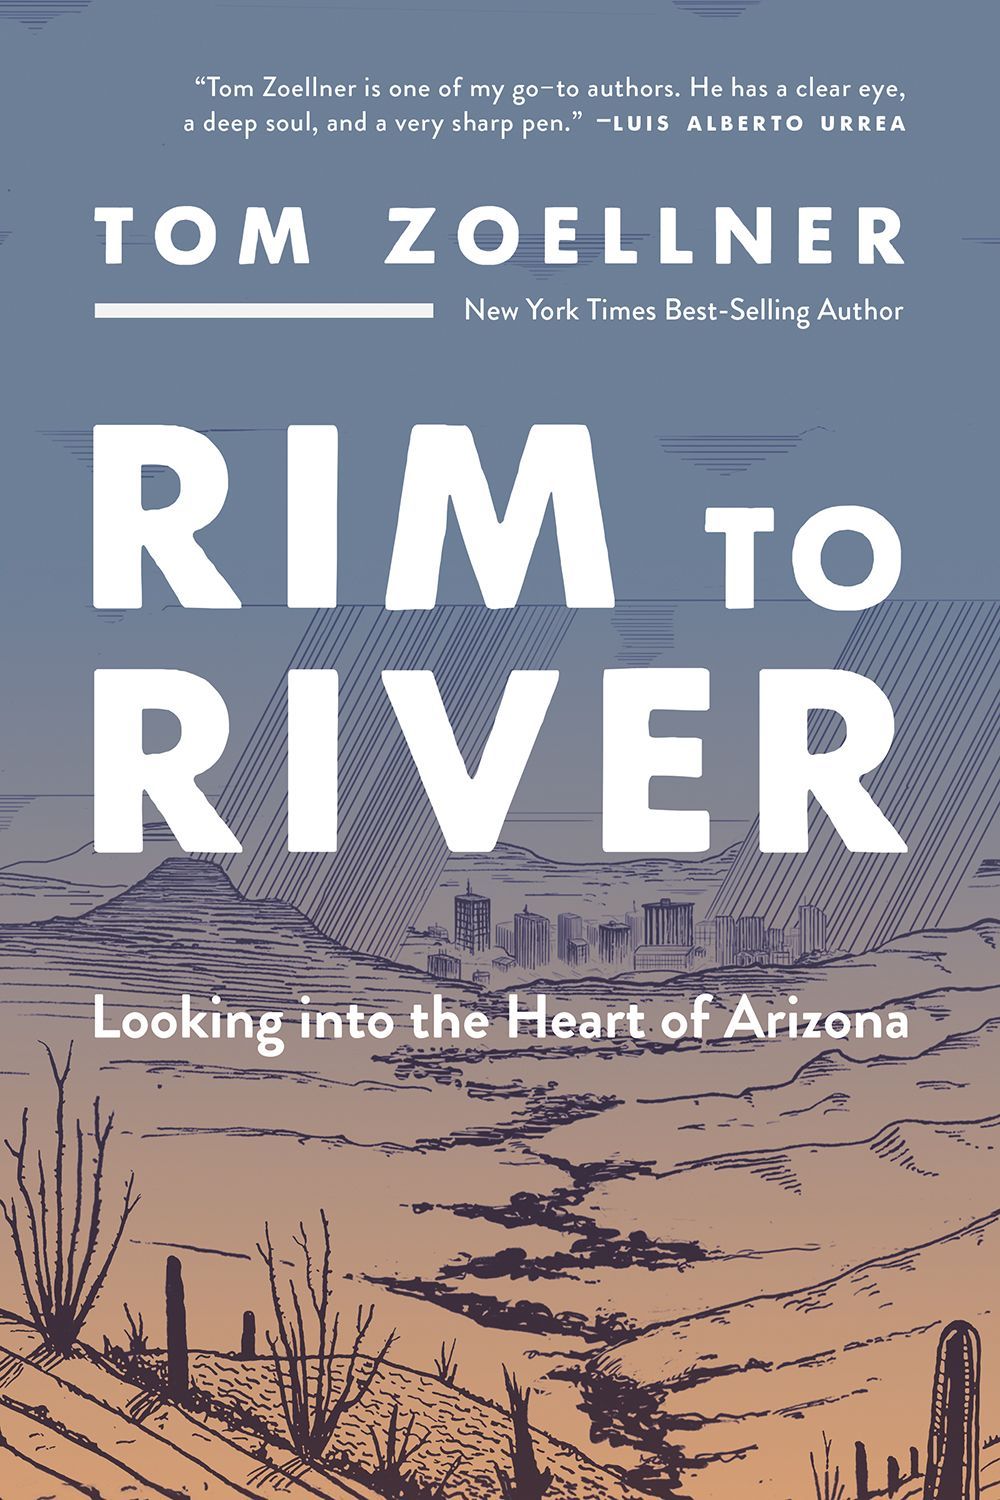 Adrift in Mythic Country: On Tom Zoellner’s “Rim to River”